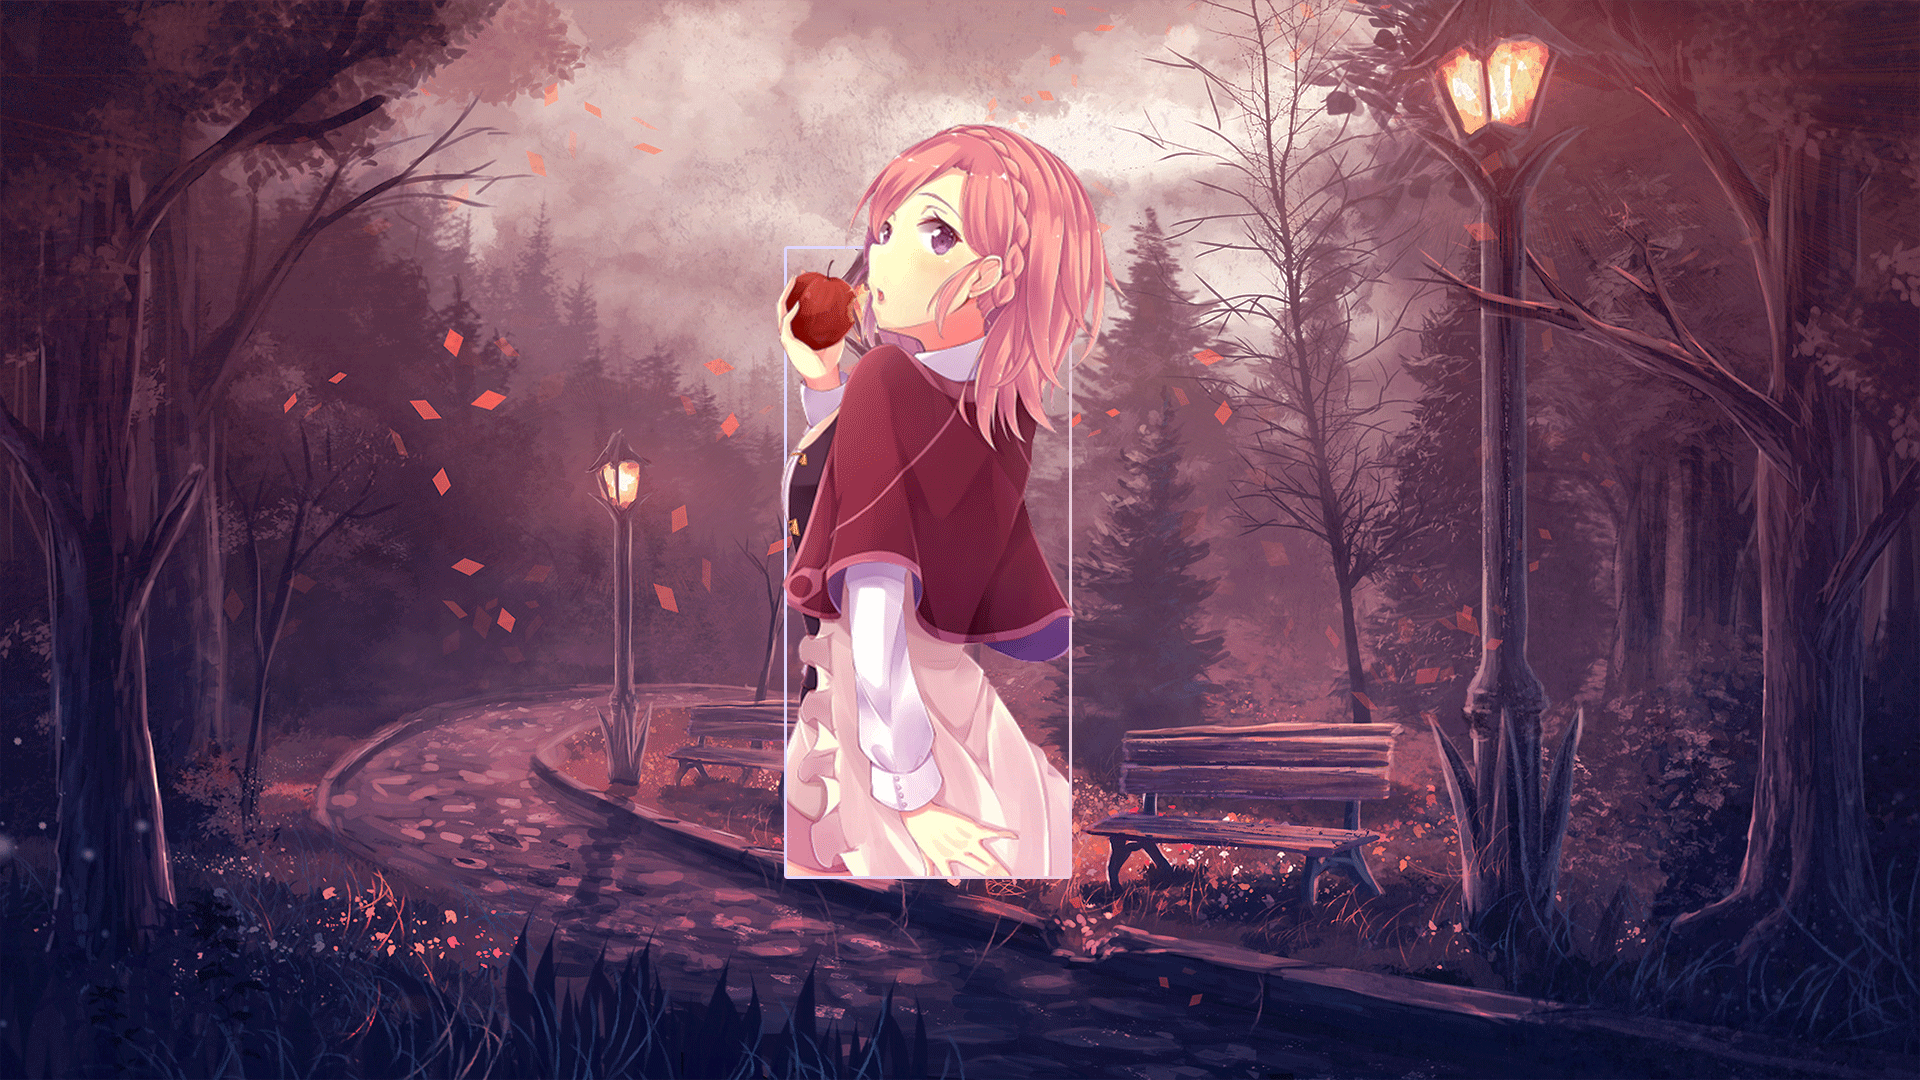 Anime Anime Girls Apple A Caramel Anime Landscape Photoshop Digital Art Picture In Picture Piture In 1920x1080